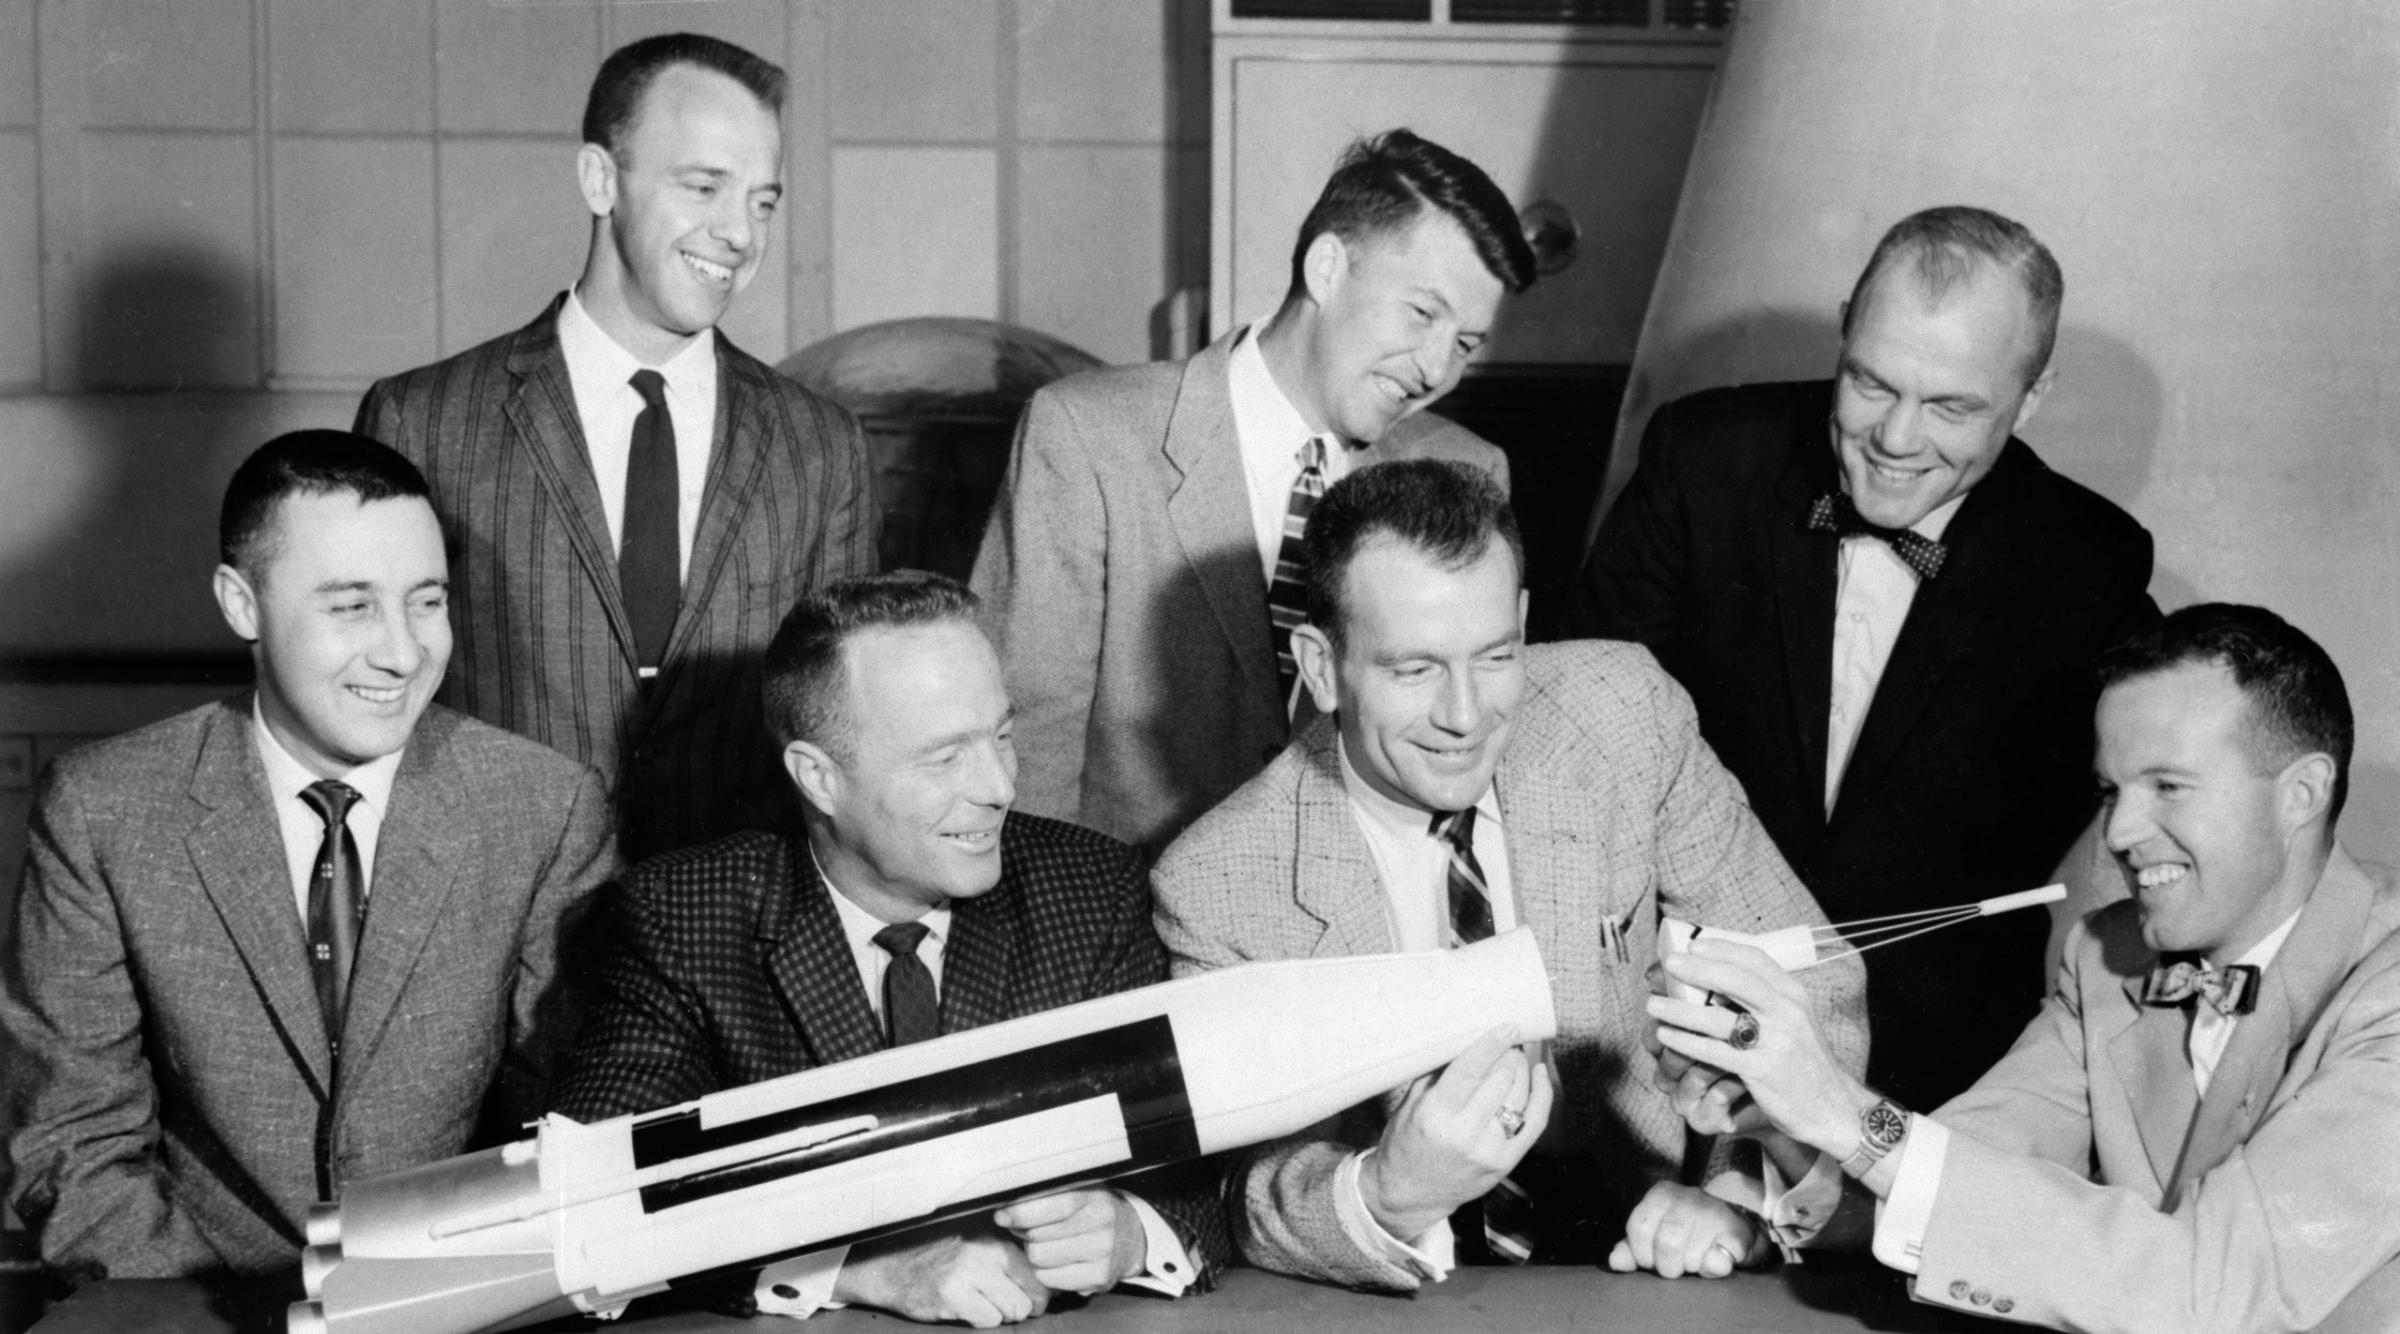 The Magnificent Seven The original seven Mercury astronauts examine a rough model of the Mercury-Atlas rocket in 1959. Back row, from left: Al Shepard, Wally Schirra and John Glenn; front row, from left: Gus Grissom, Scott Carpenter, Deke Slayton and Gordon Cooper.